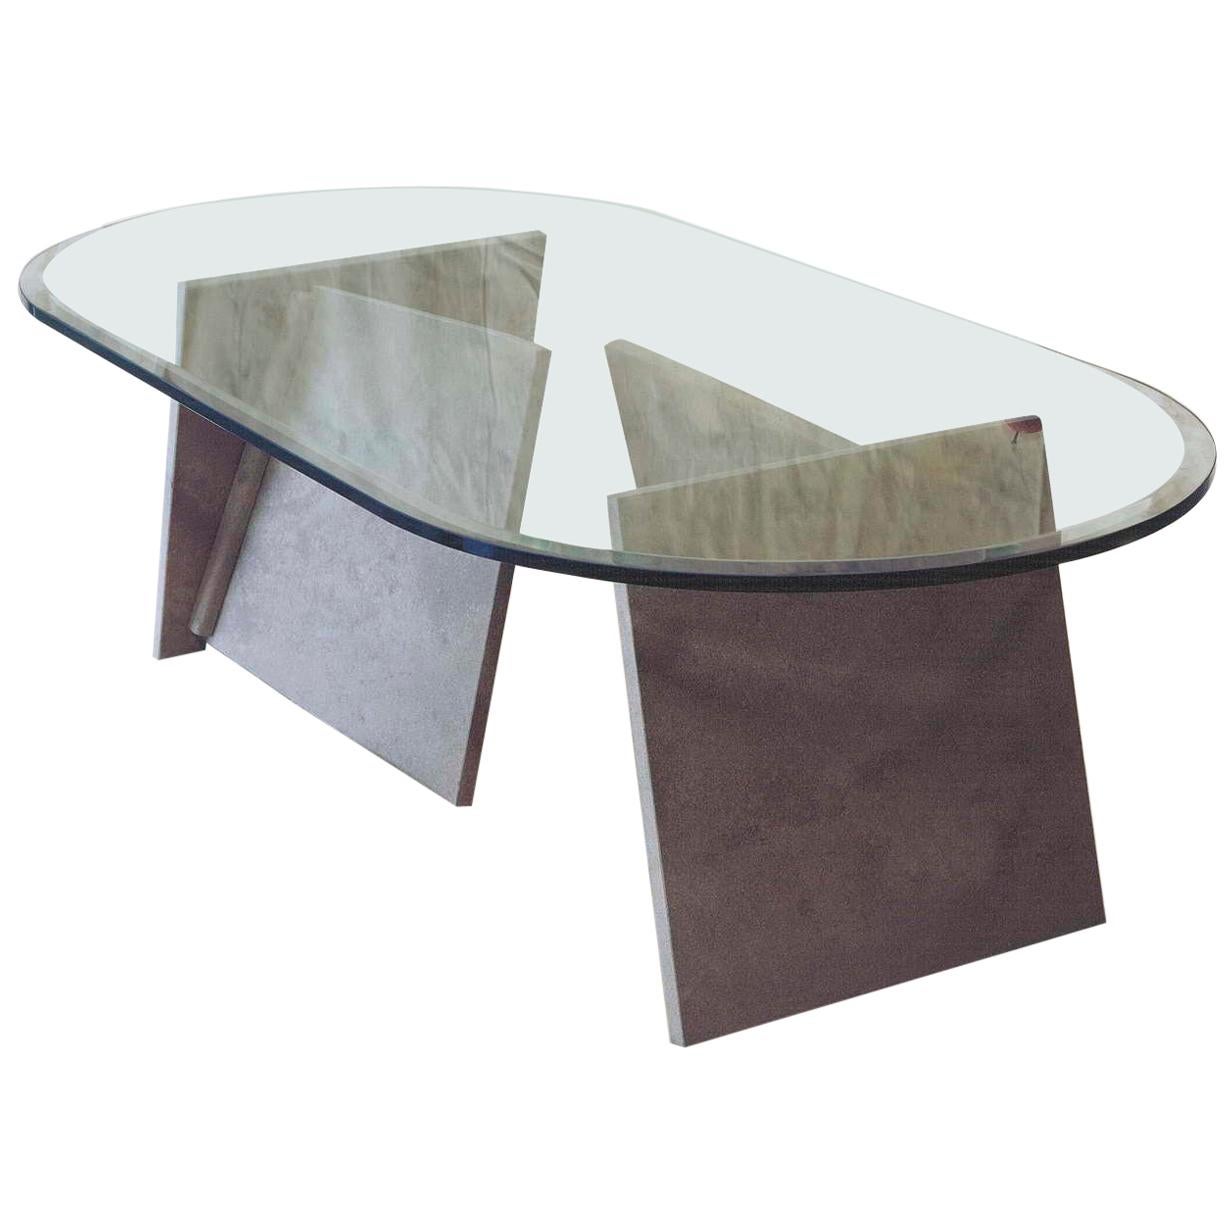 21st Century by Arch. E. Mari "DUE CARTE" Marble Coffee Table with Crystal Top For Sale